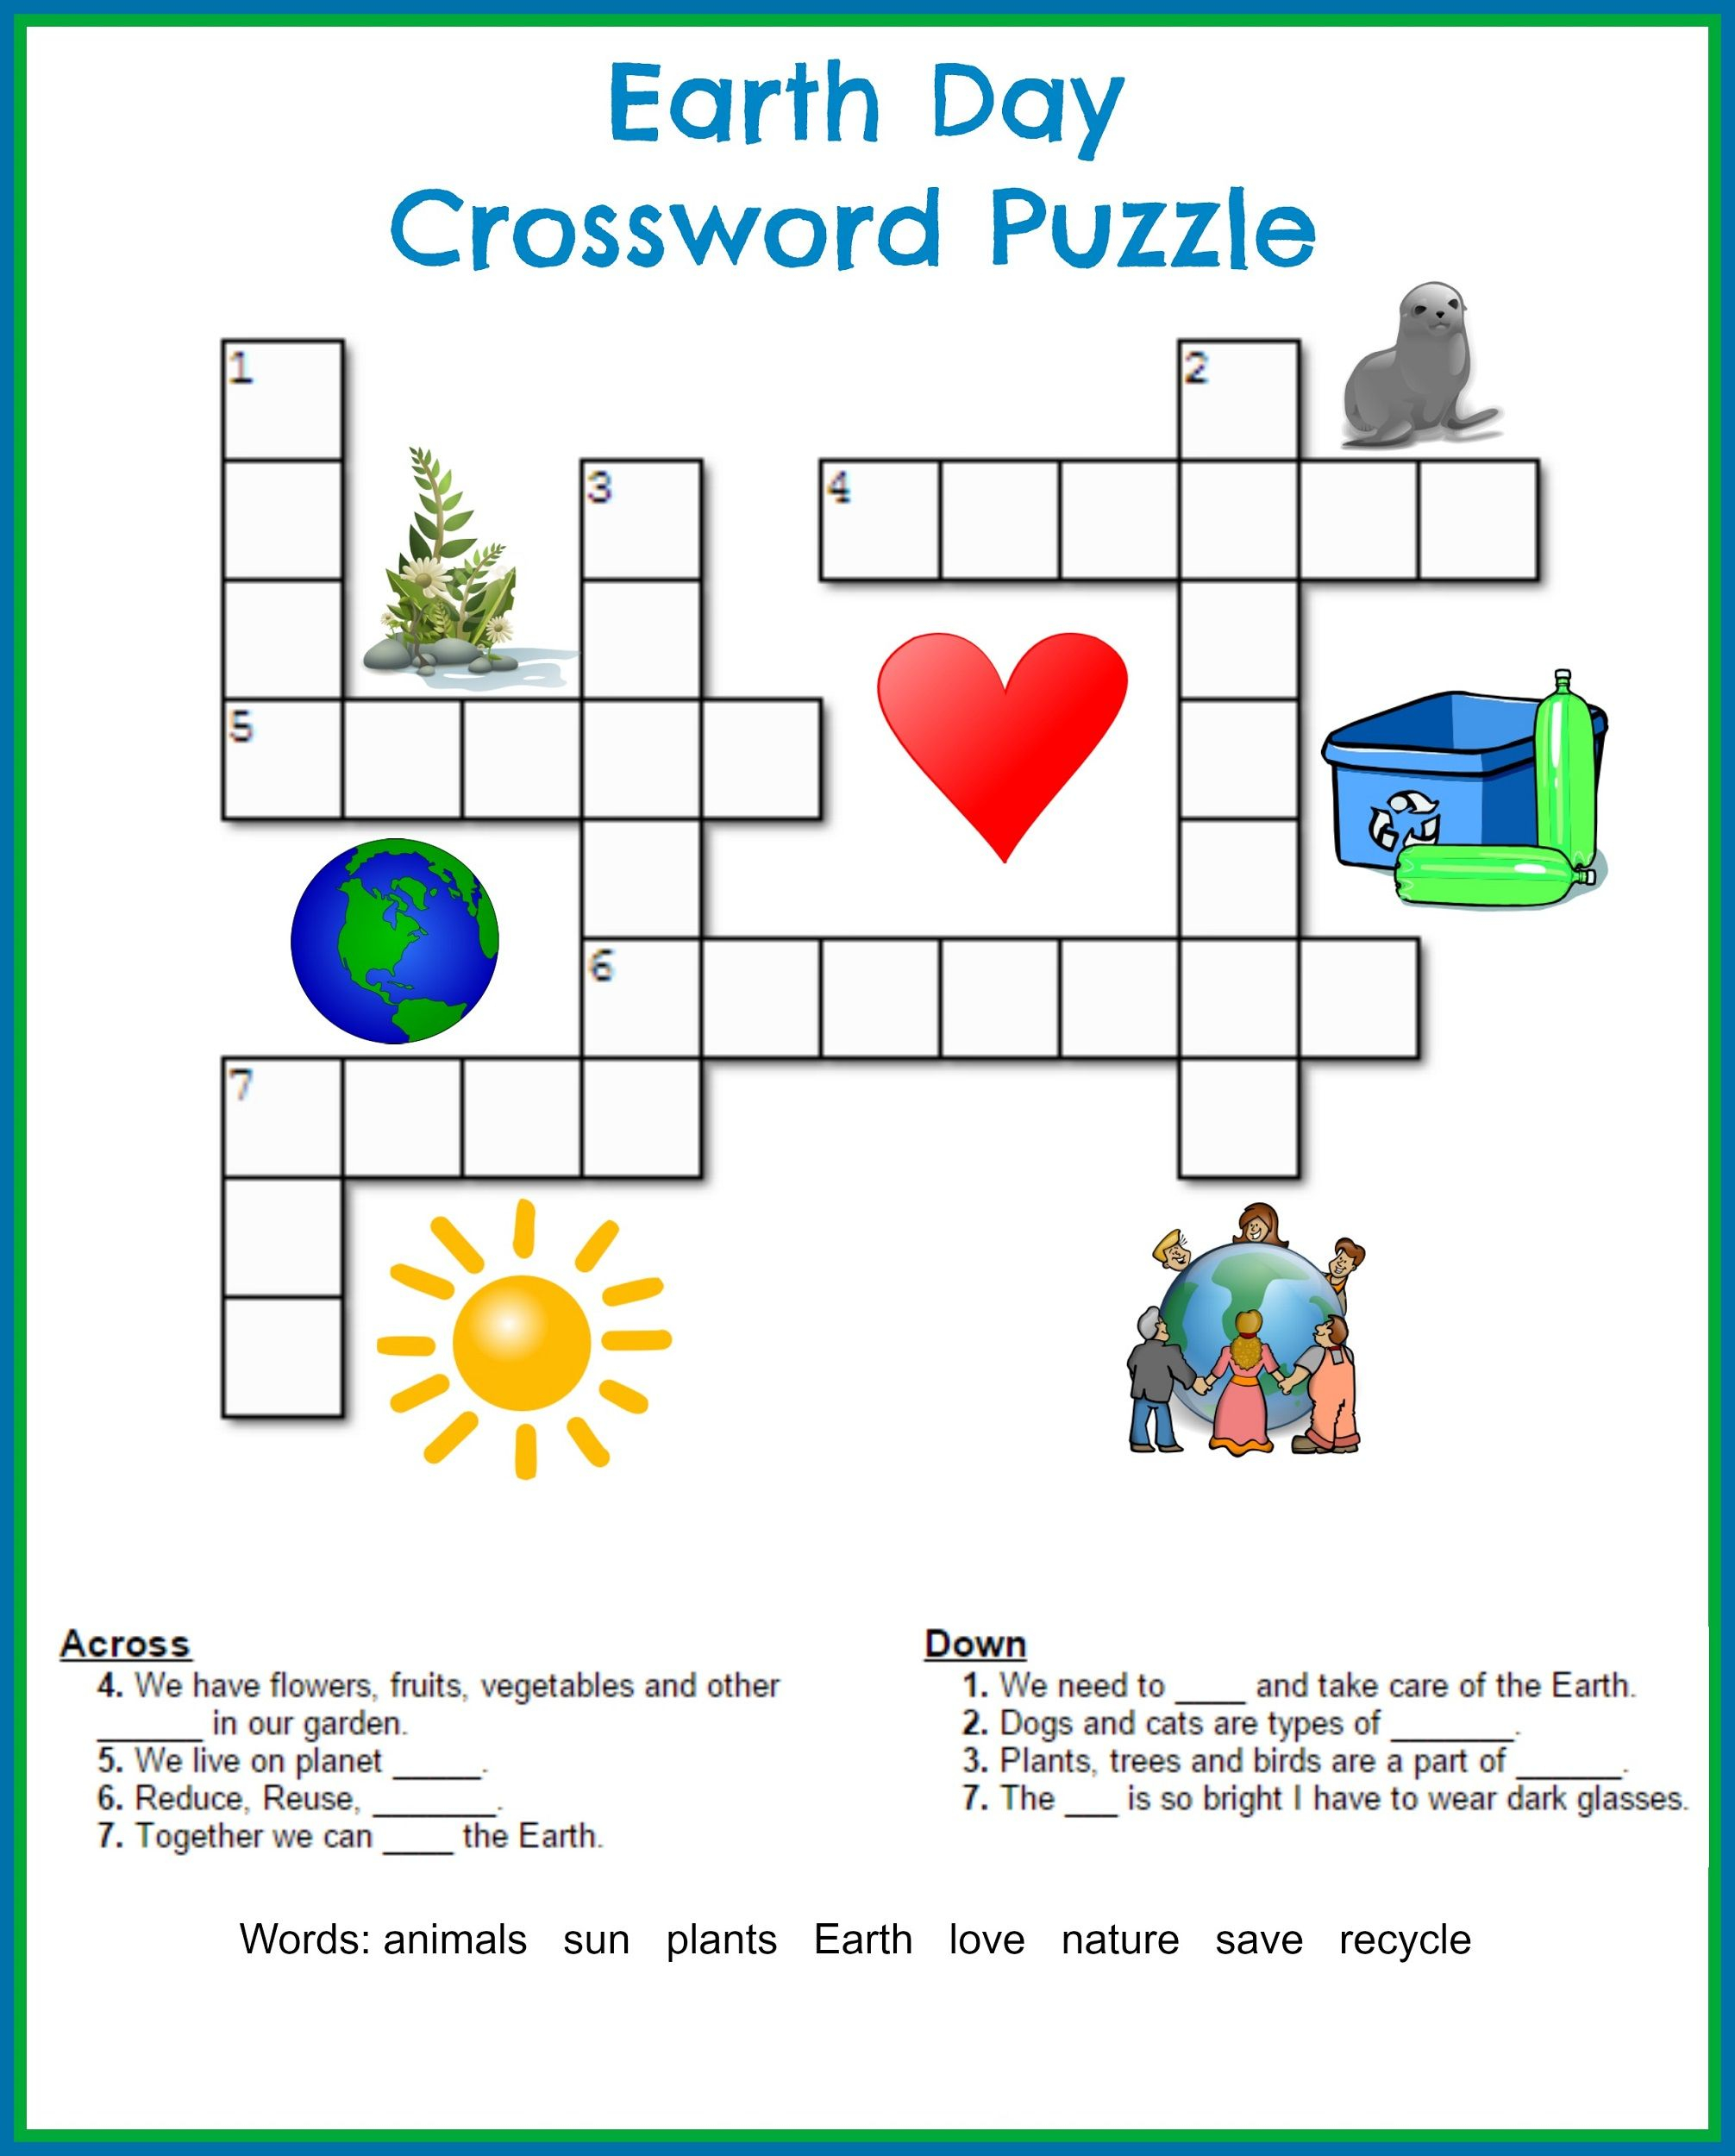 Youth Crossword Puzzles Printable